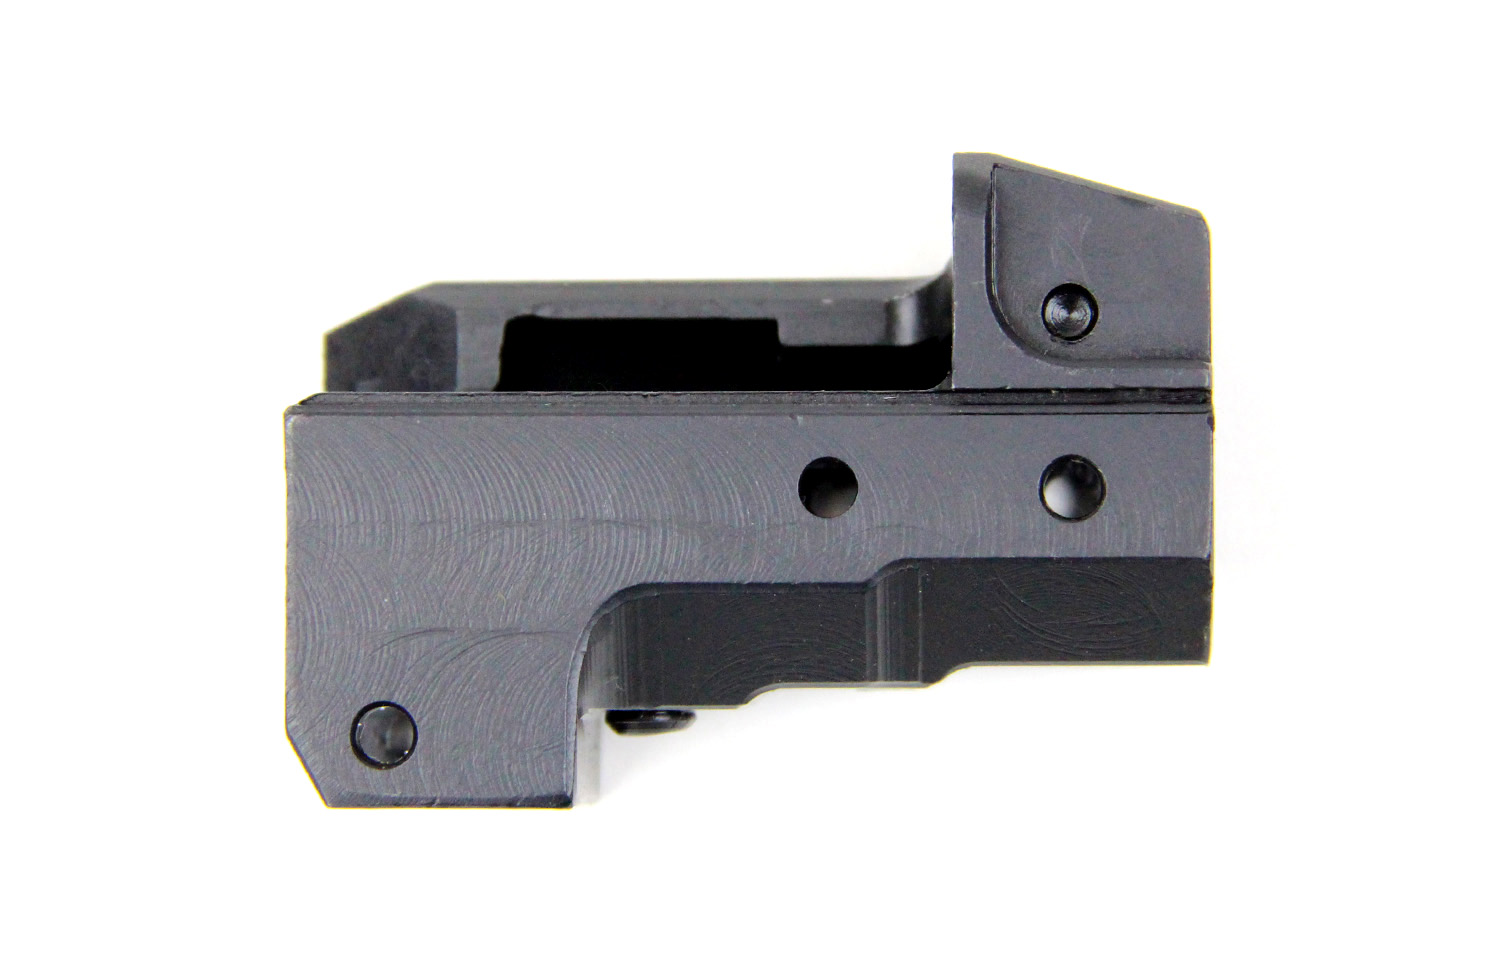 Front Trunnion for AK-74, AK-12, and Other 5.45x39mm